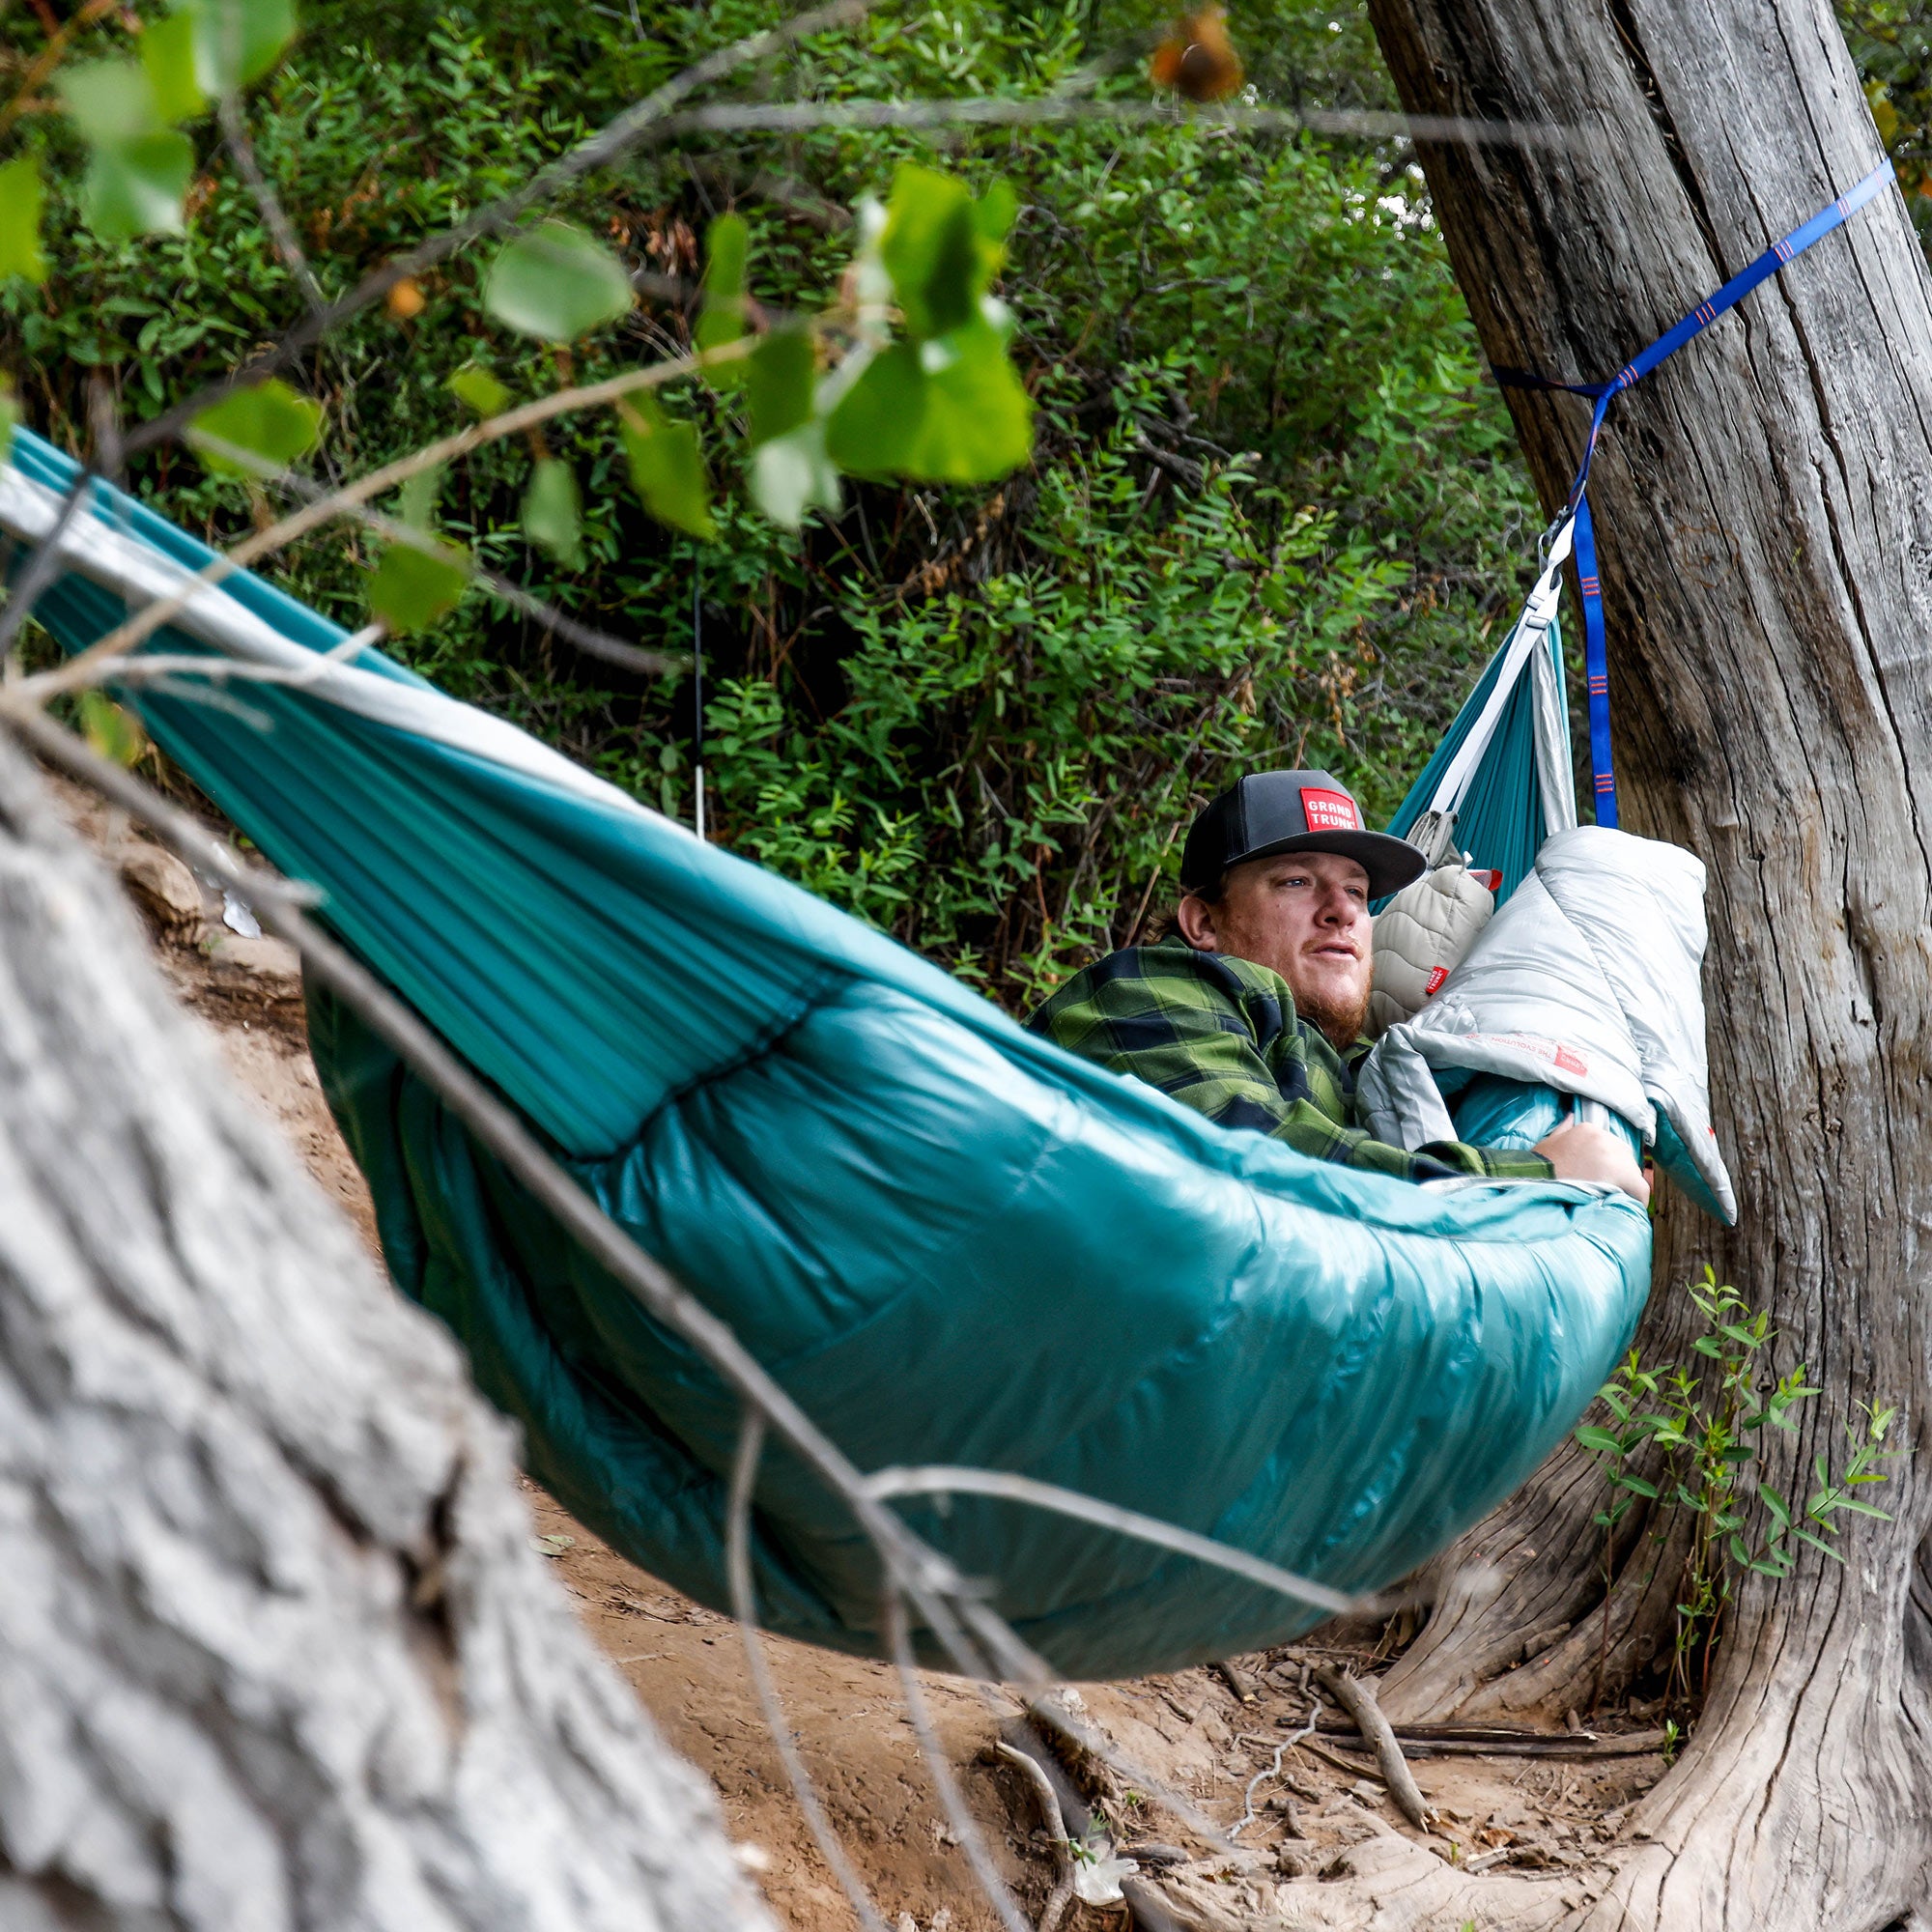 Man laying in Grand Trunk Evolution Hammock looking at nature admiring its beauty